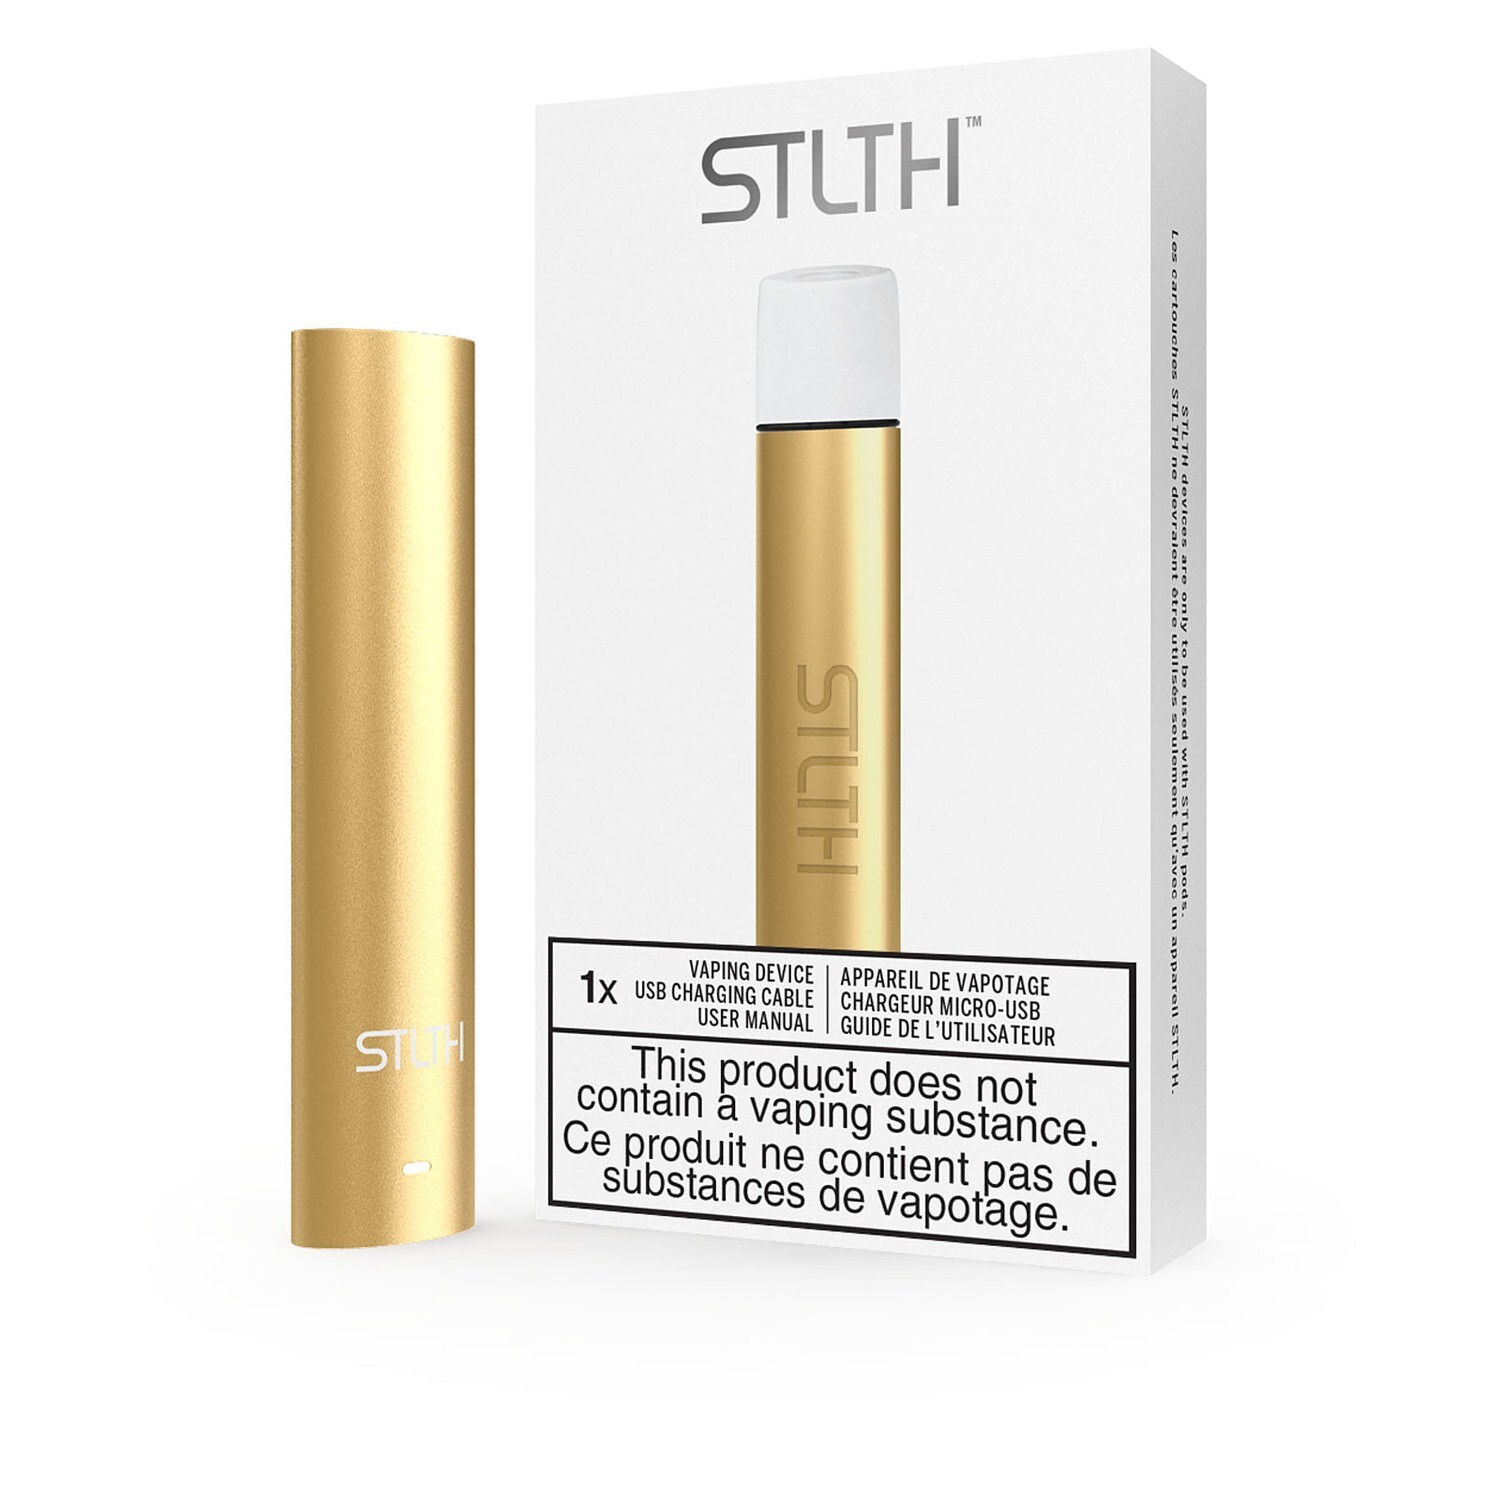 STLTH DEVICE GOLD METAL